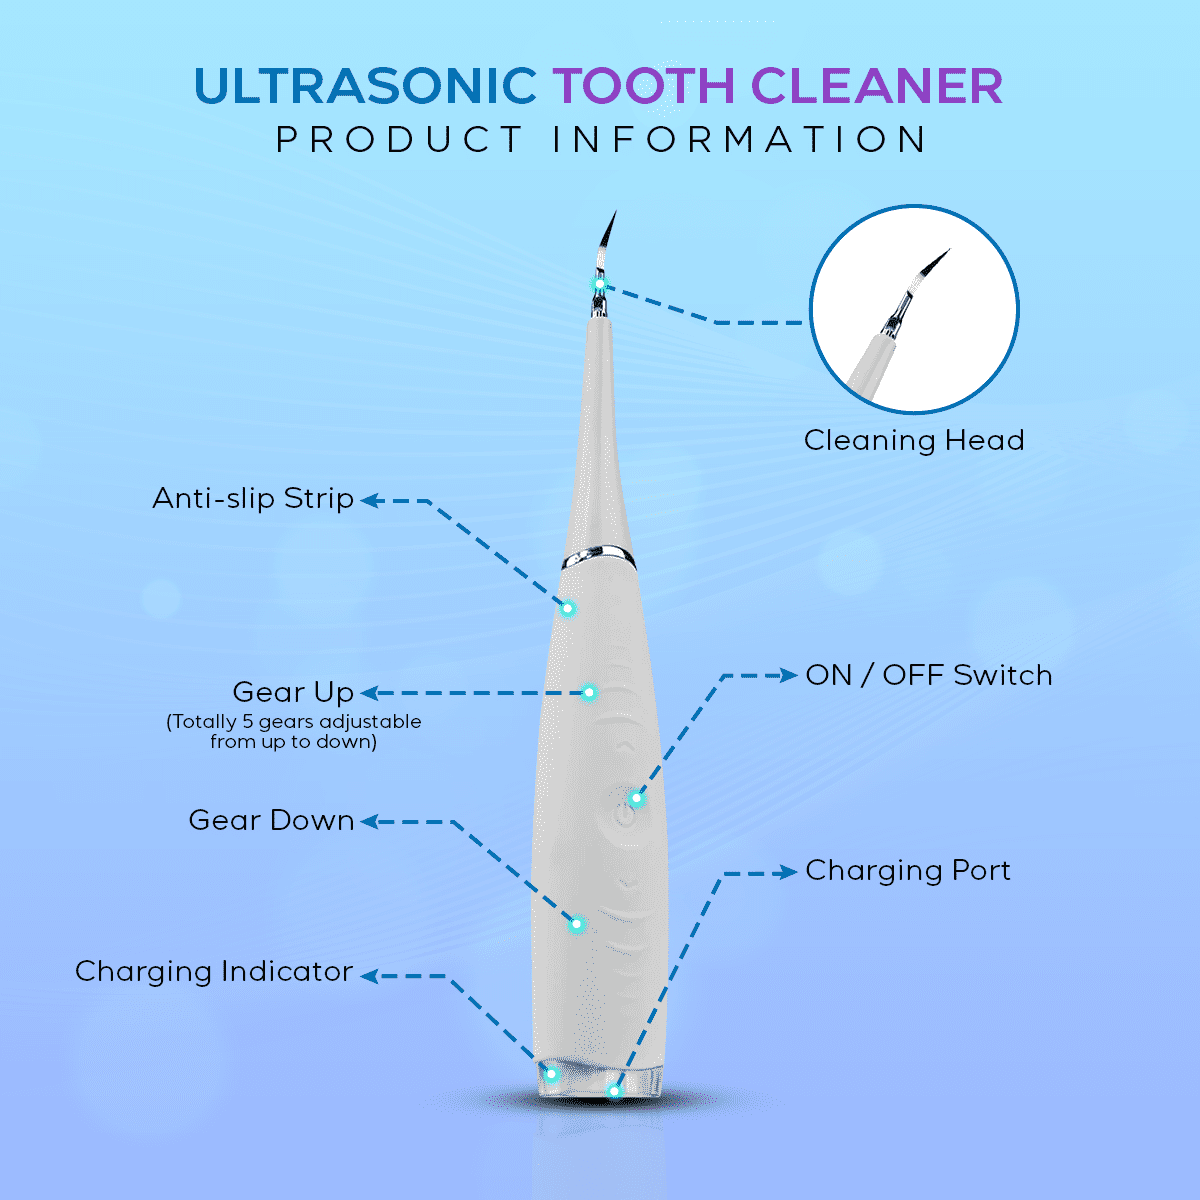 Ultrasonic Tooth Cleaner - Remove Tartar At Home